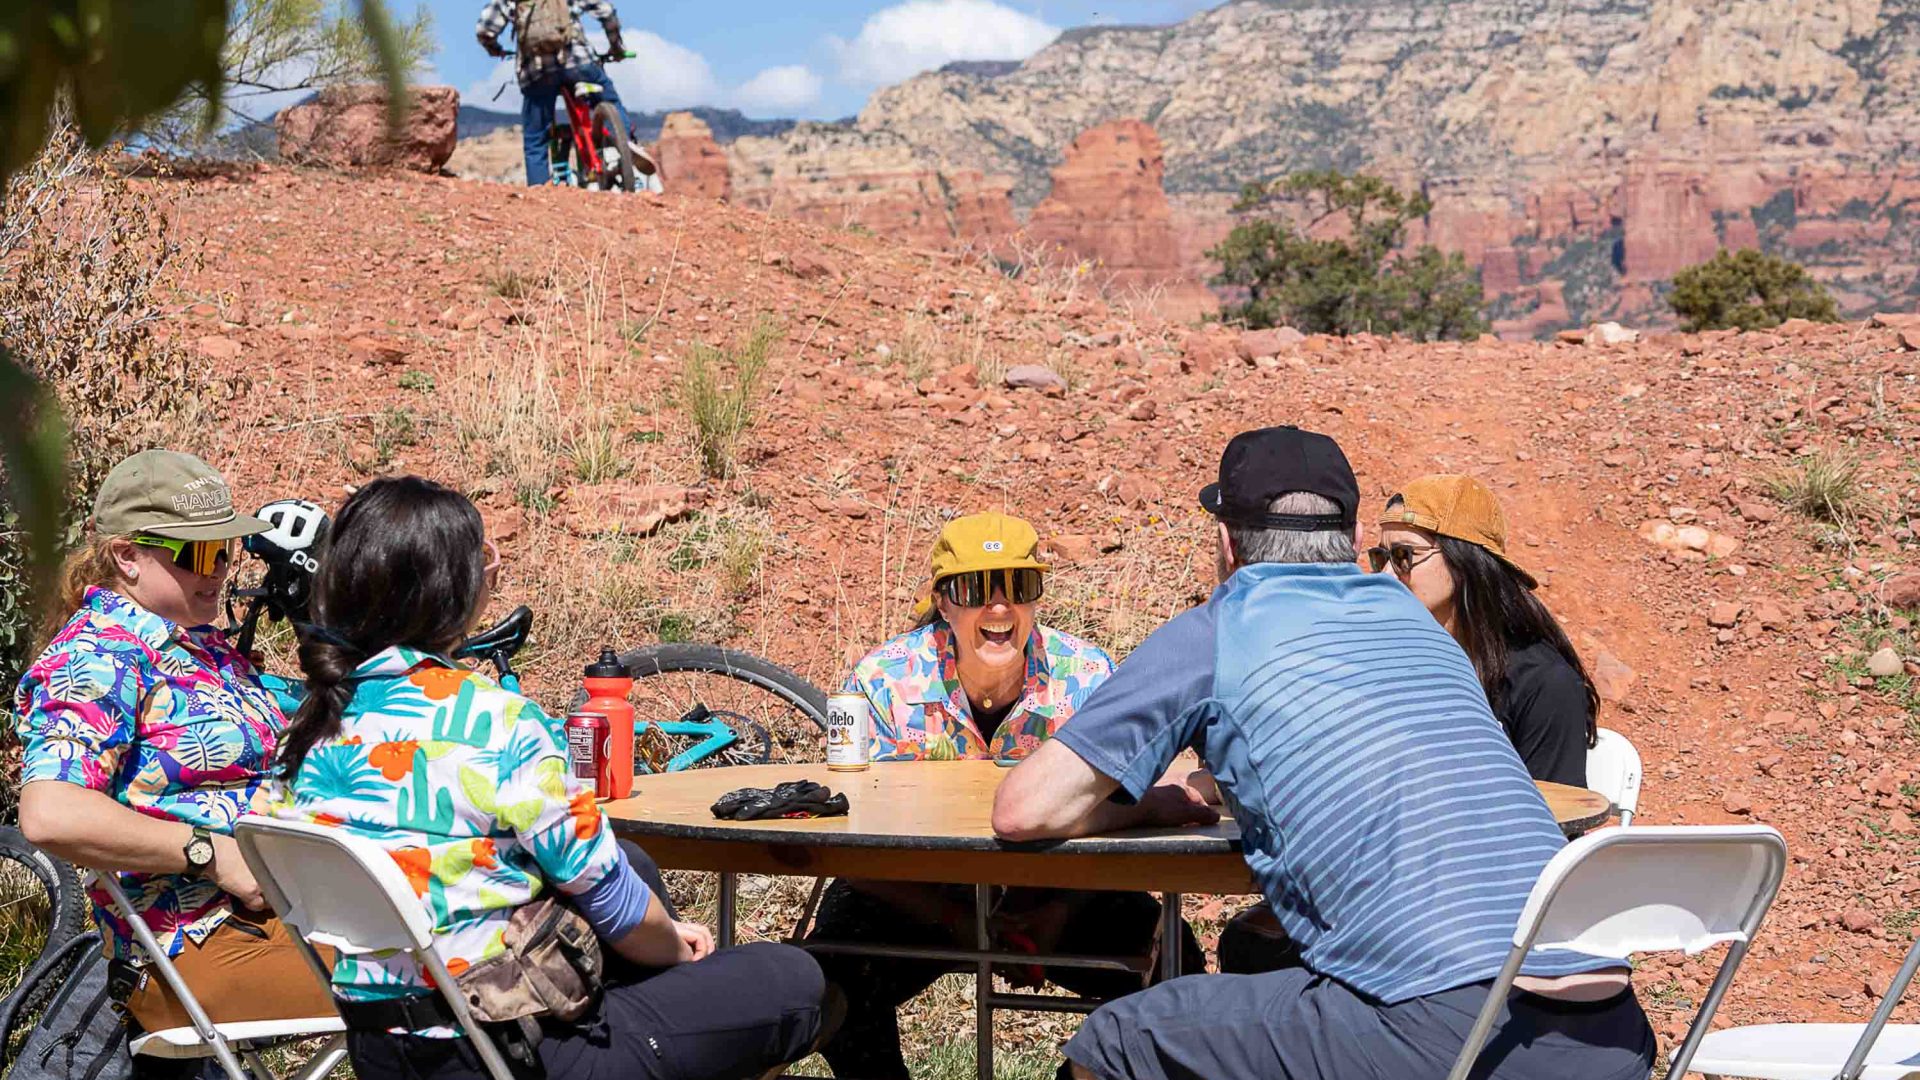 People sit around a table laughing while a mountain biker can be seen on a hill in the background.